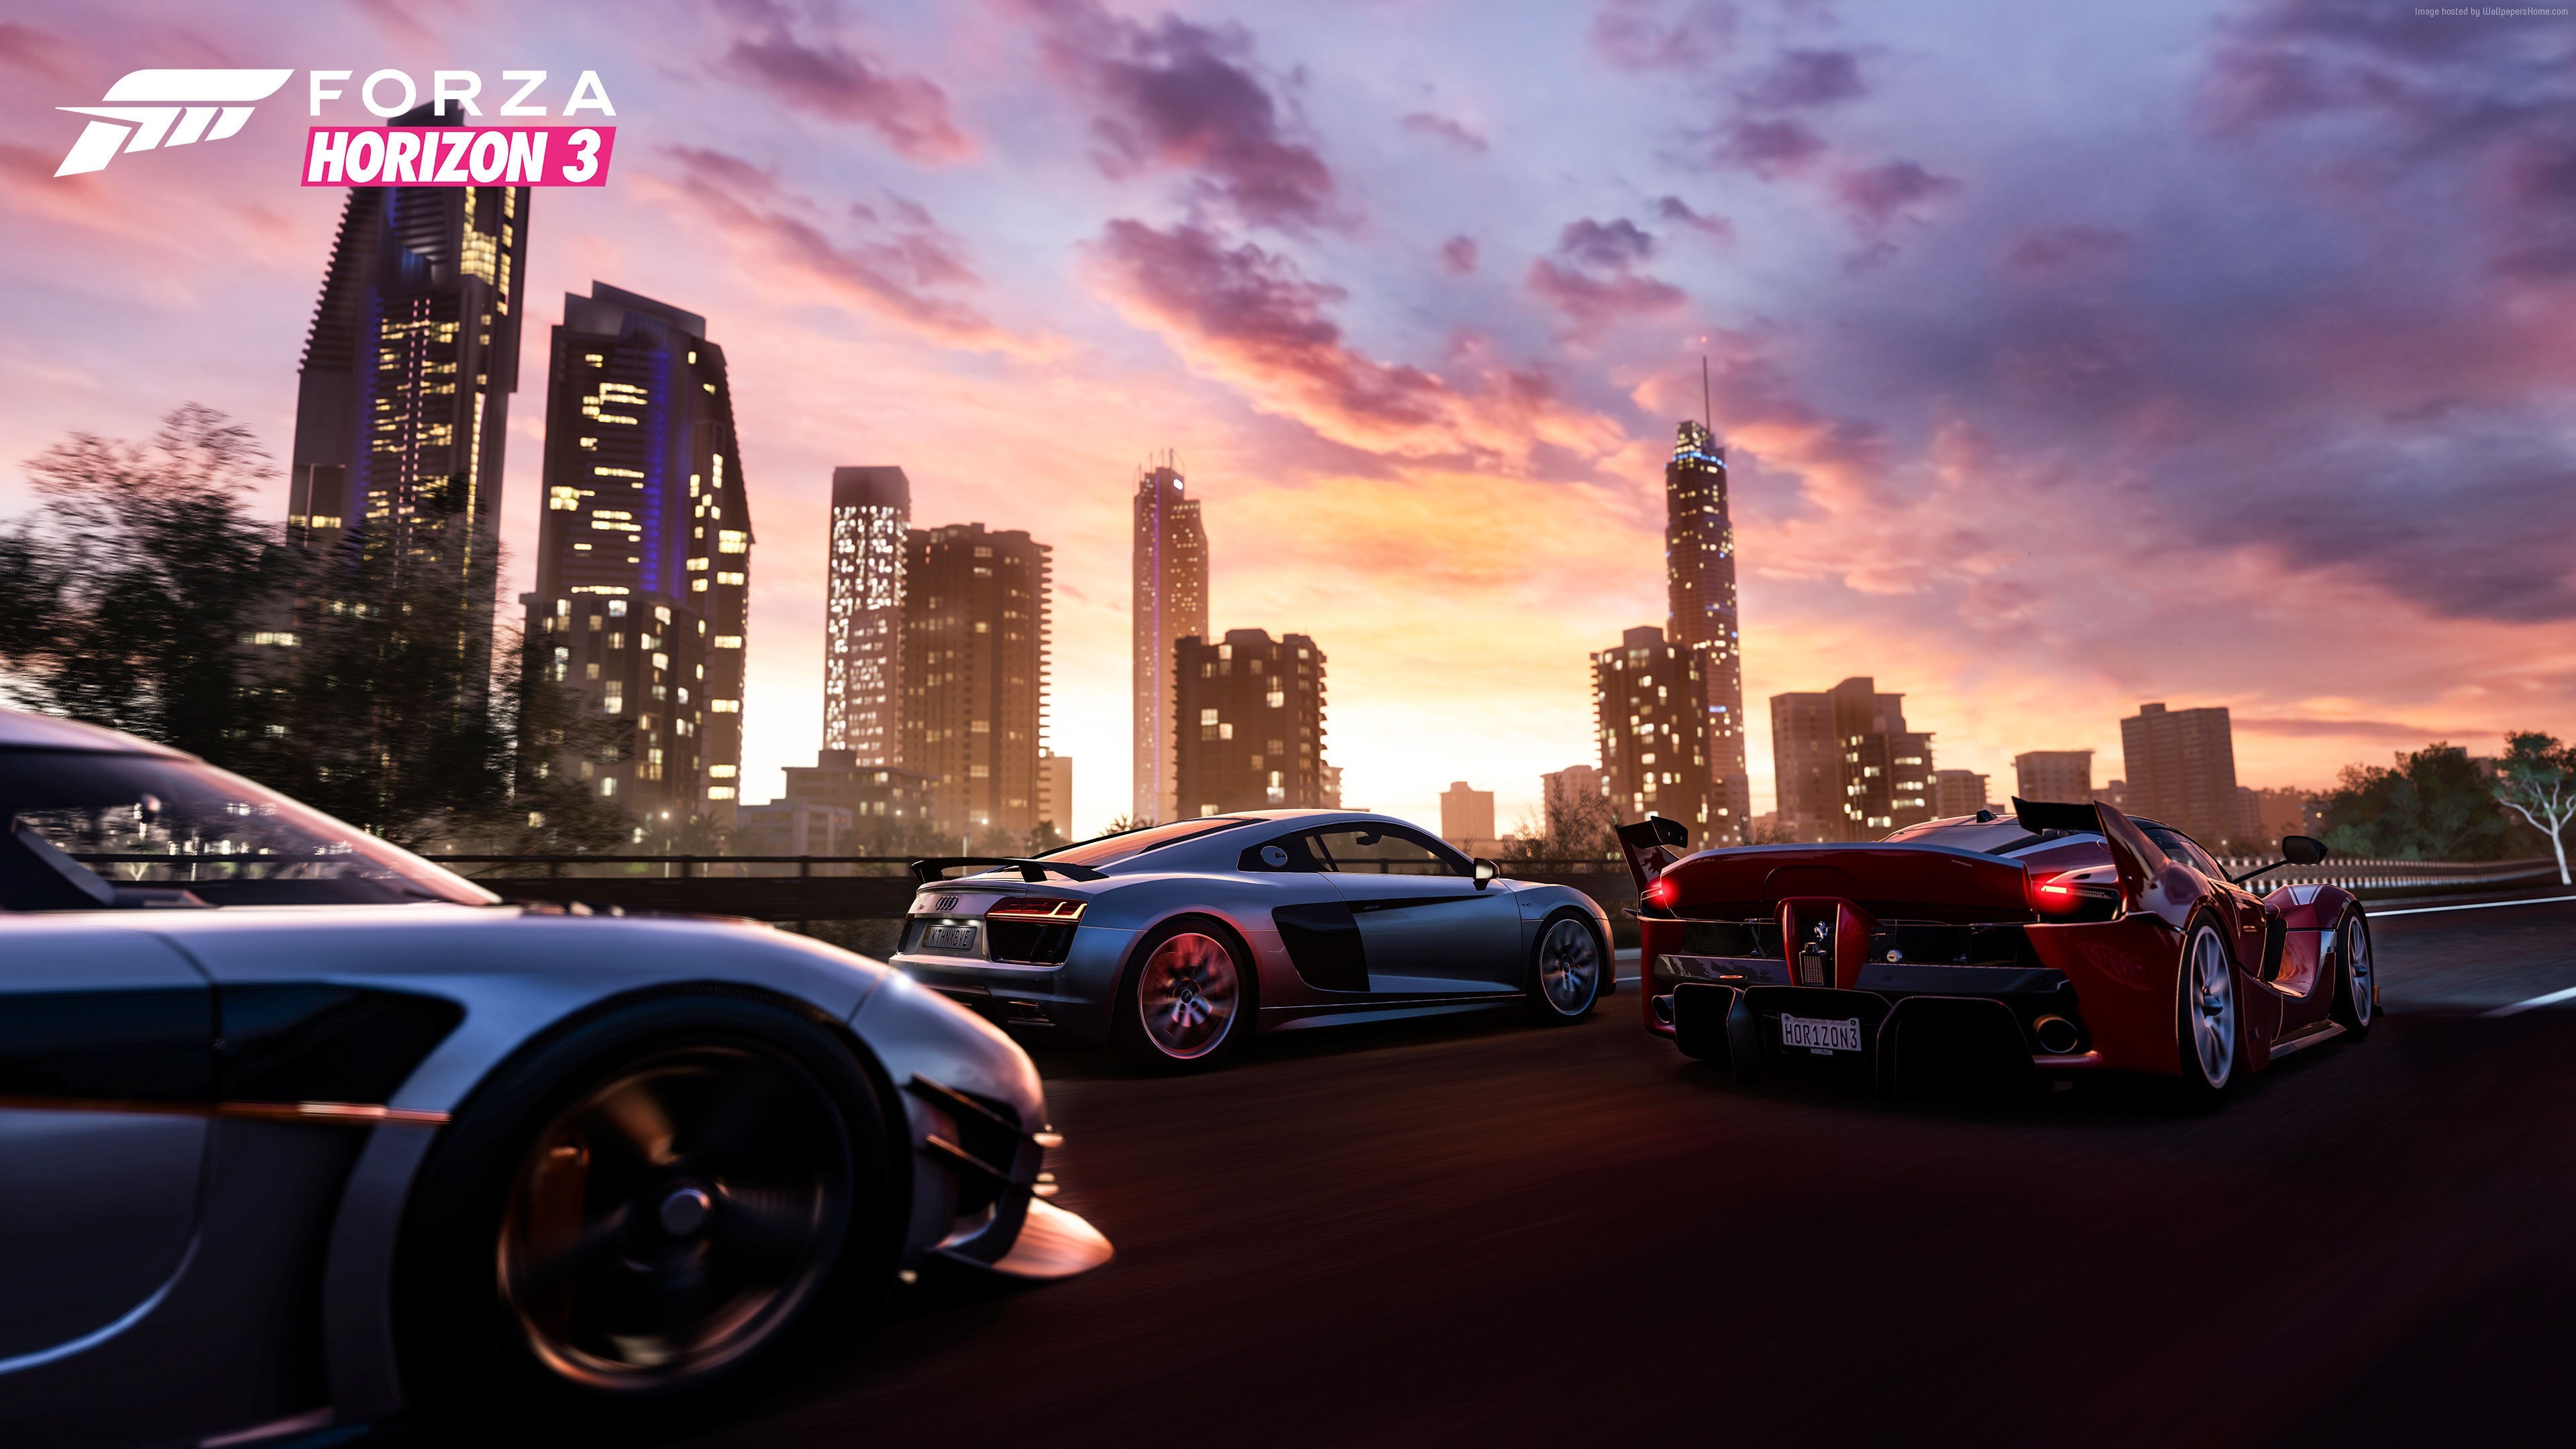 3840x2160 Wallpaper Forza Horizon 3, racing, extreme, E3 2016, best games,  PlayStation 4, Xbox One, Windows, Best Games, Sport